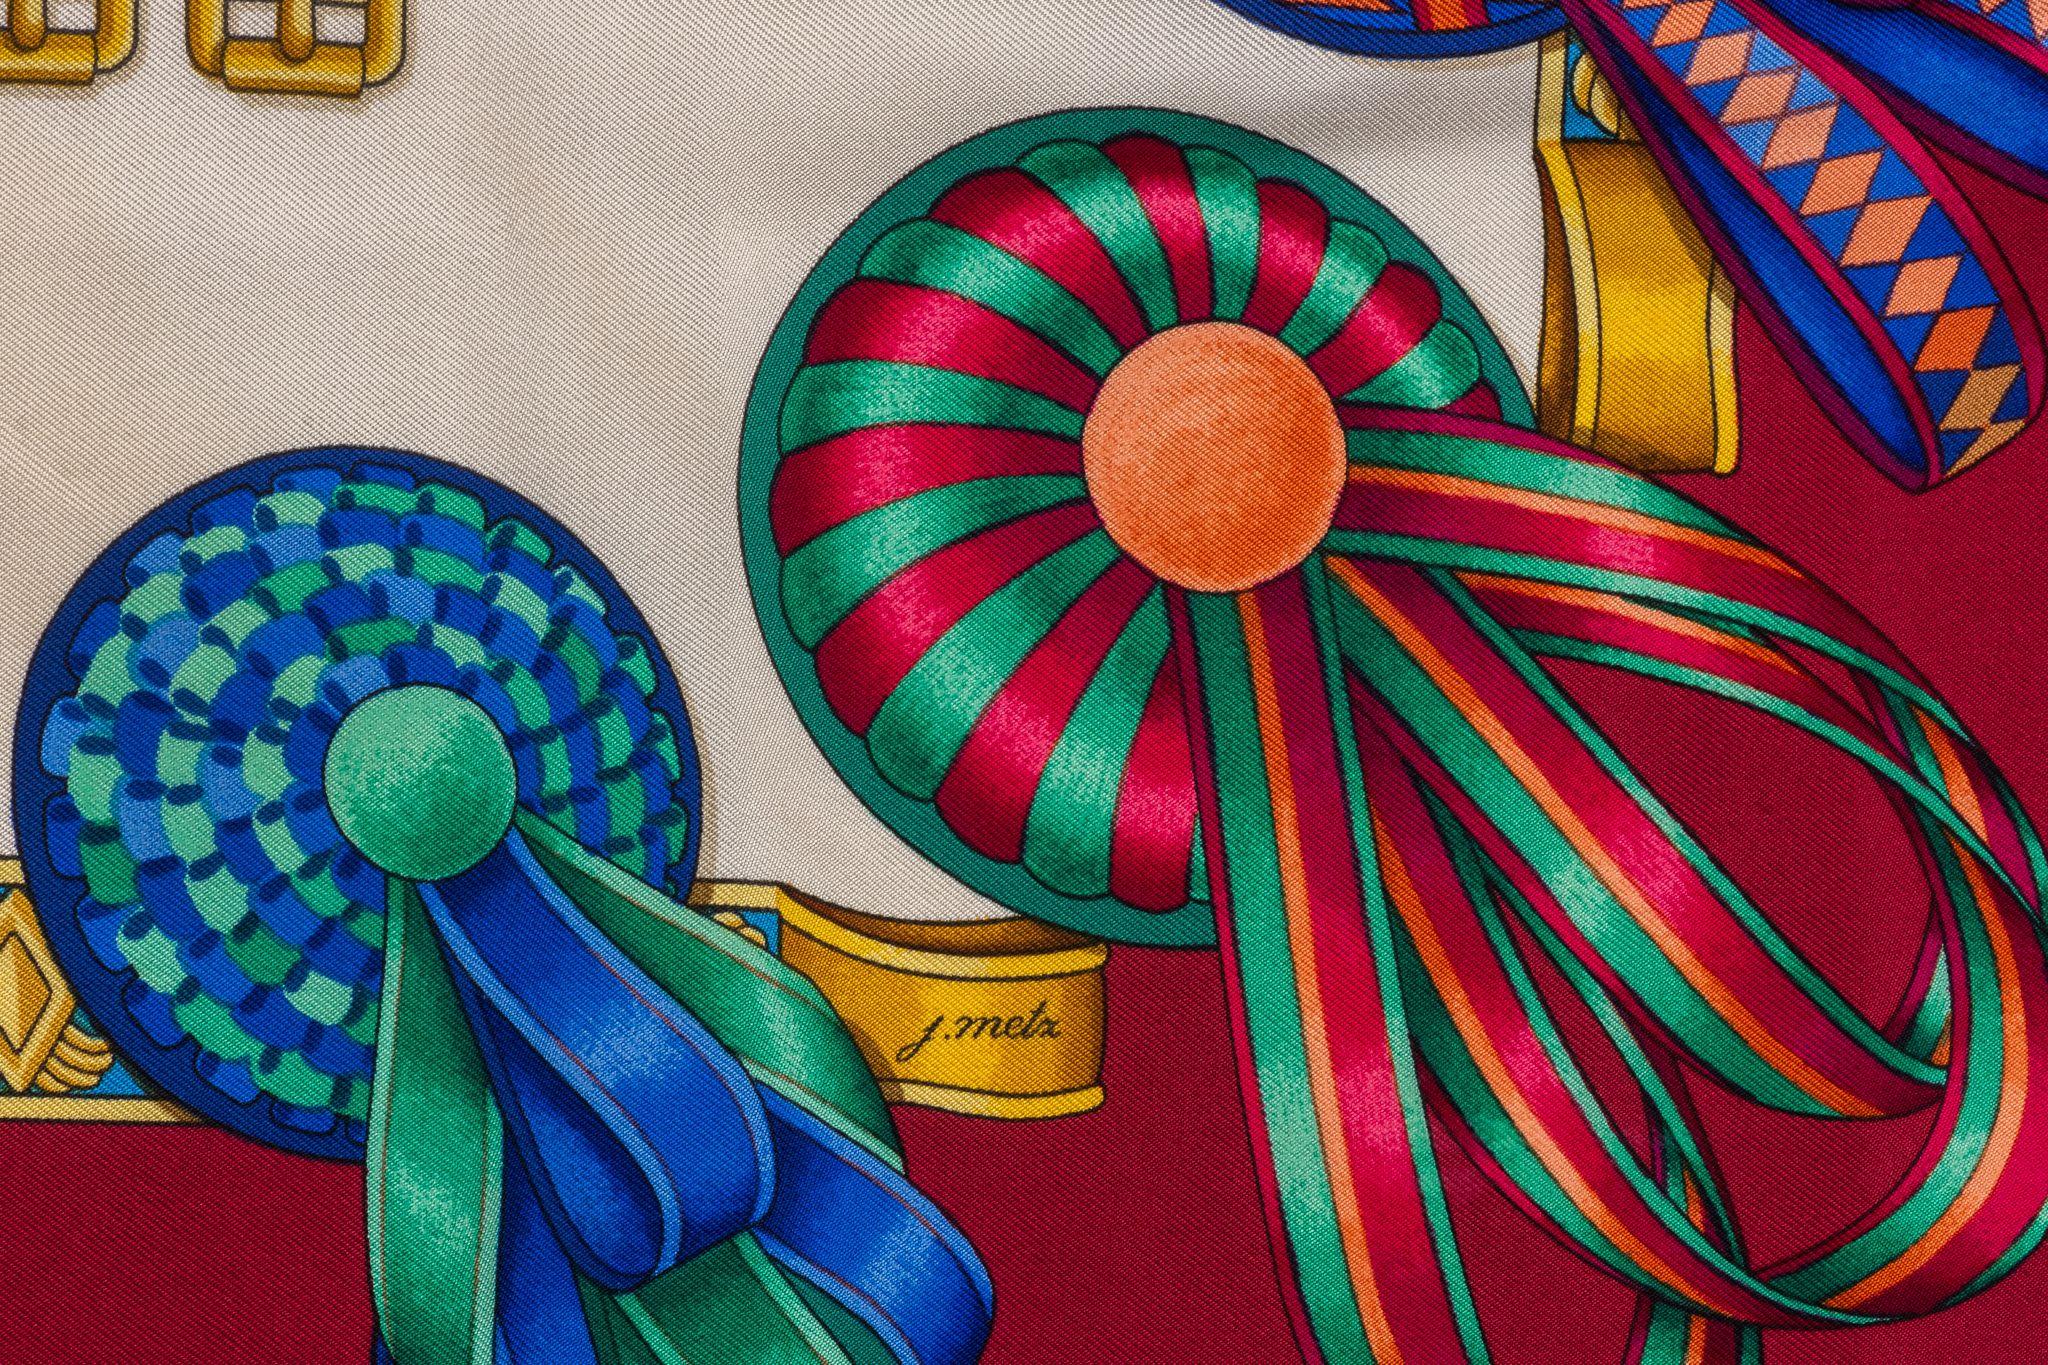 Hermes Les Rubans Du Cheval Scarf In Excellent Condition For Sale In West Hollywood, CA